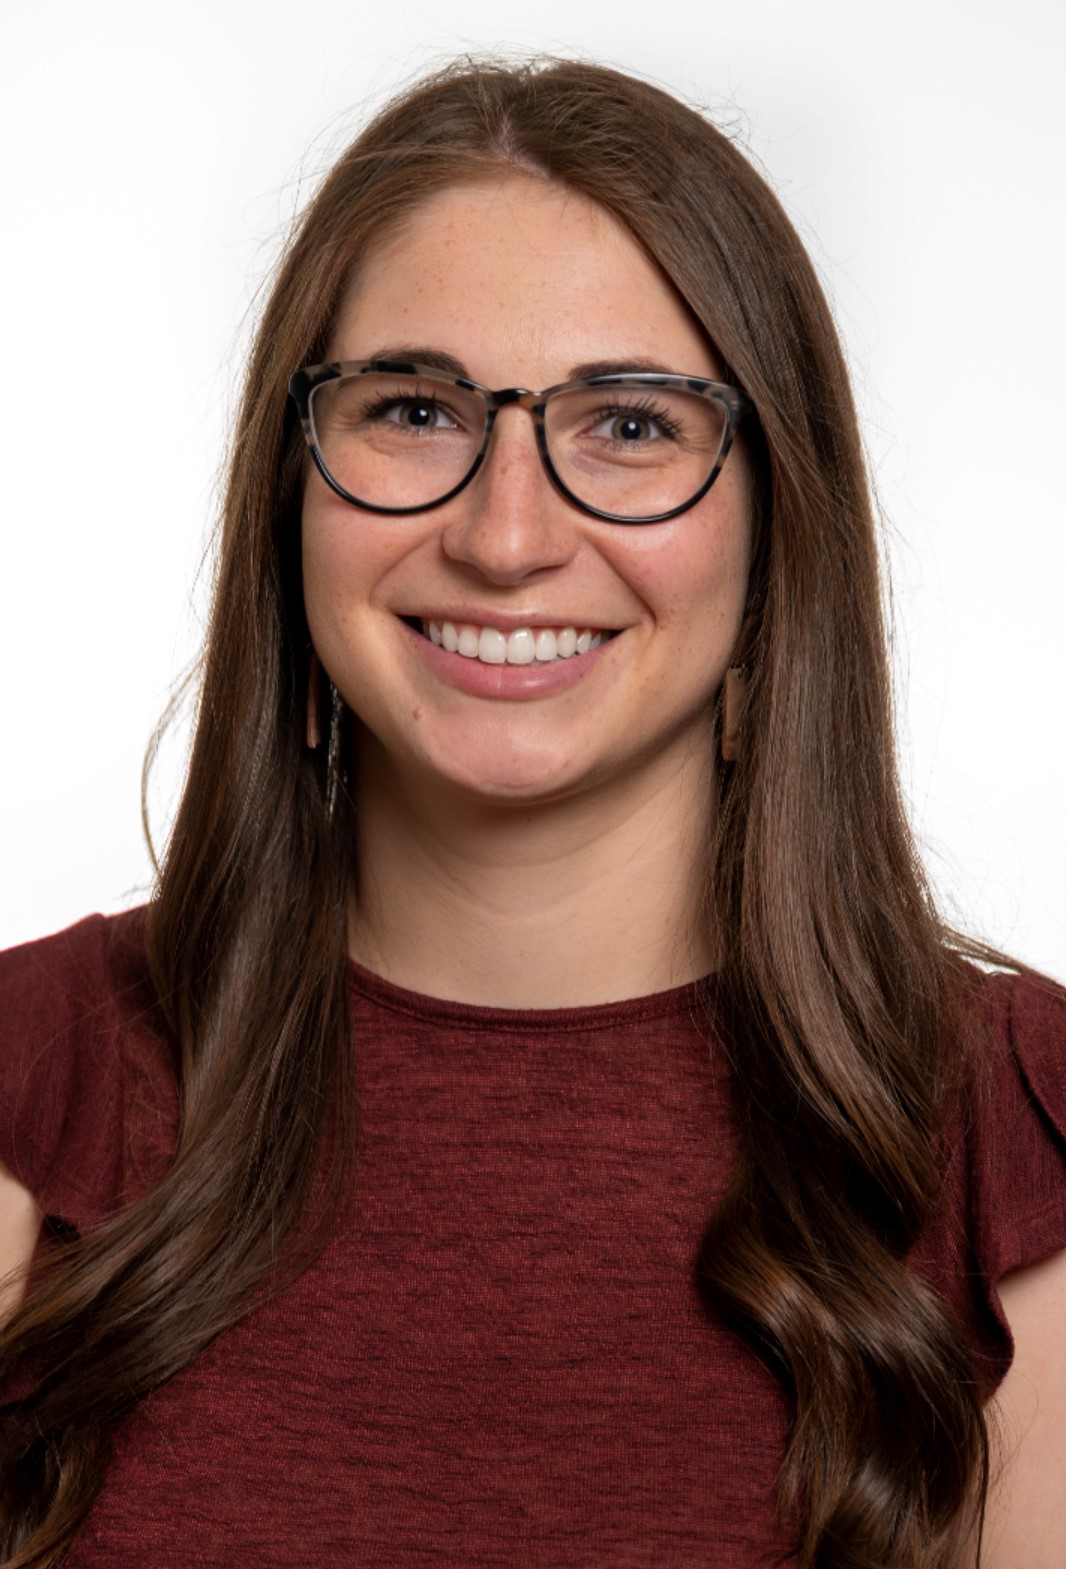 photo of katy putzker, brown hair, glasses, wearing maroon shirt and smiling